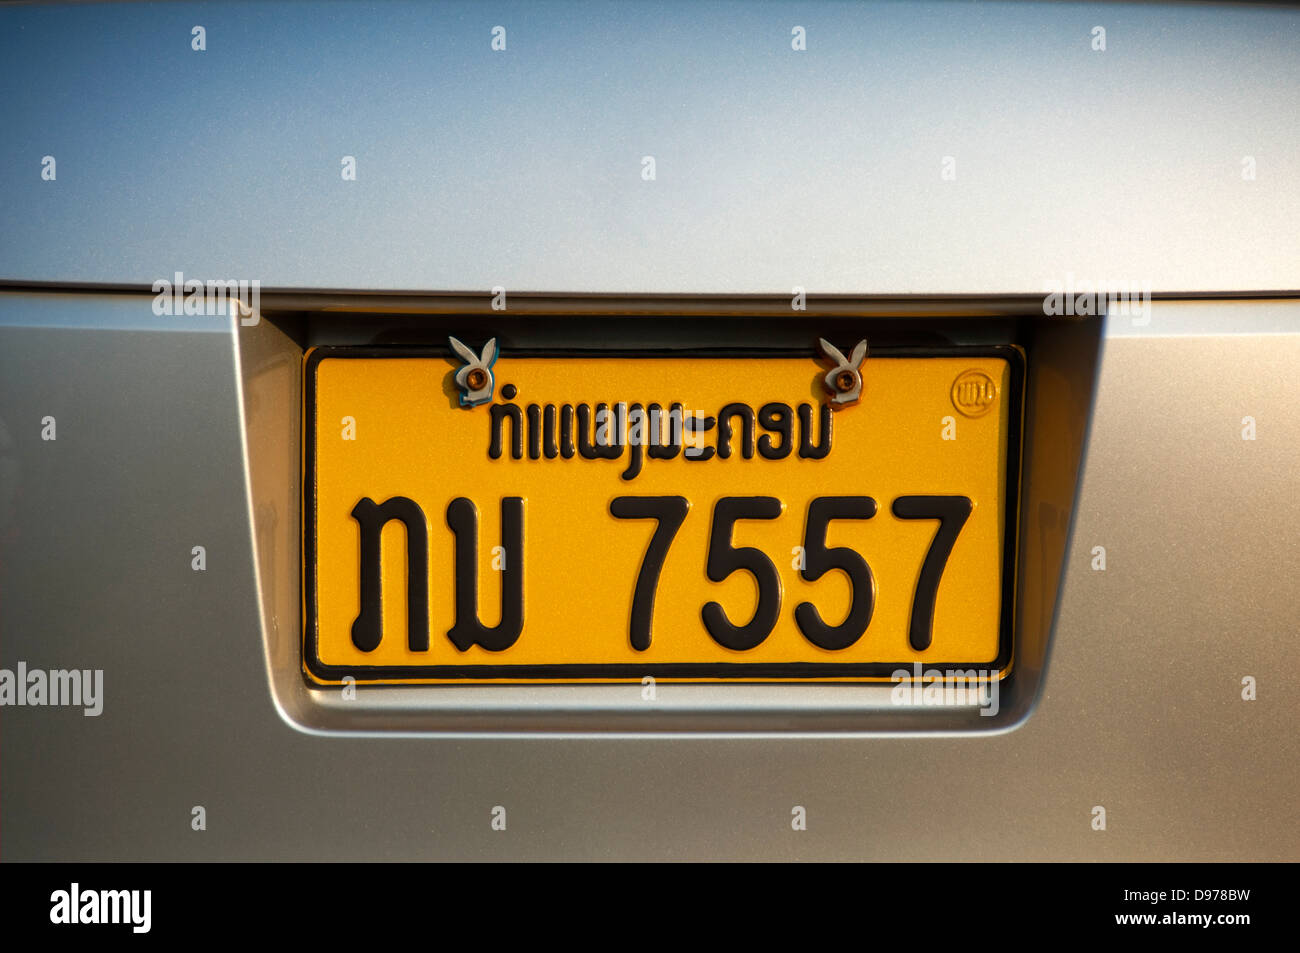 Horizontal close up view of a number plate in the Lao language. Stock Photo